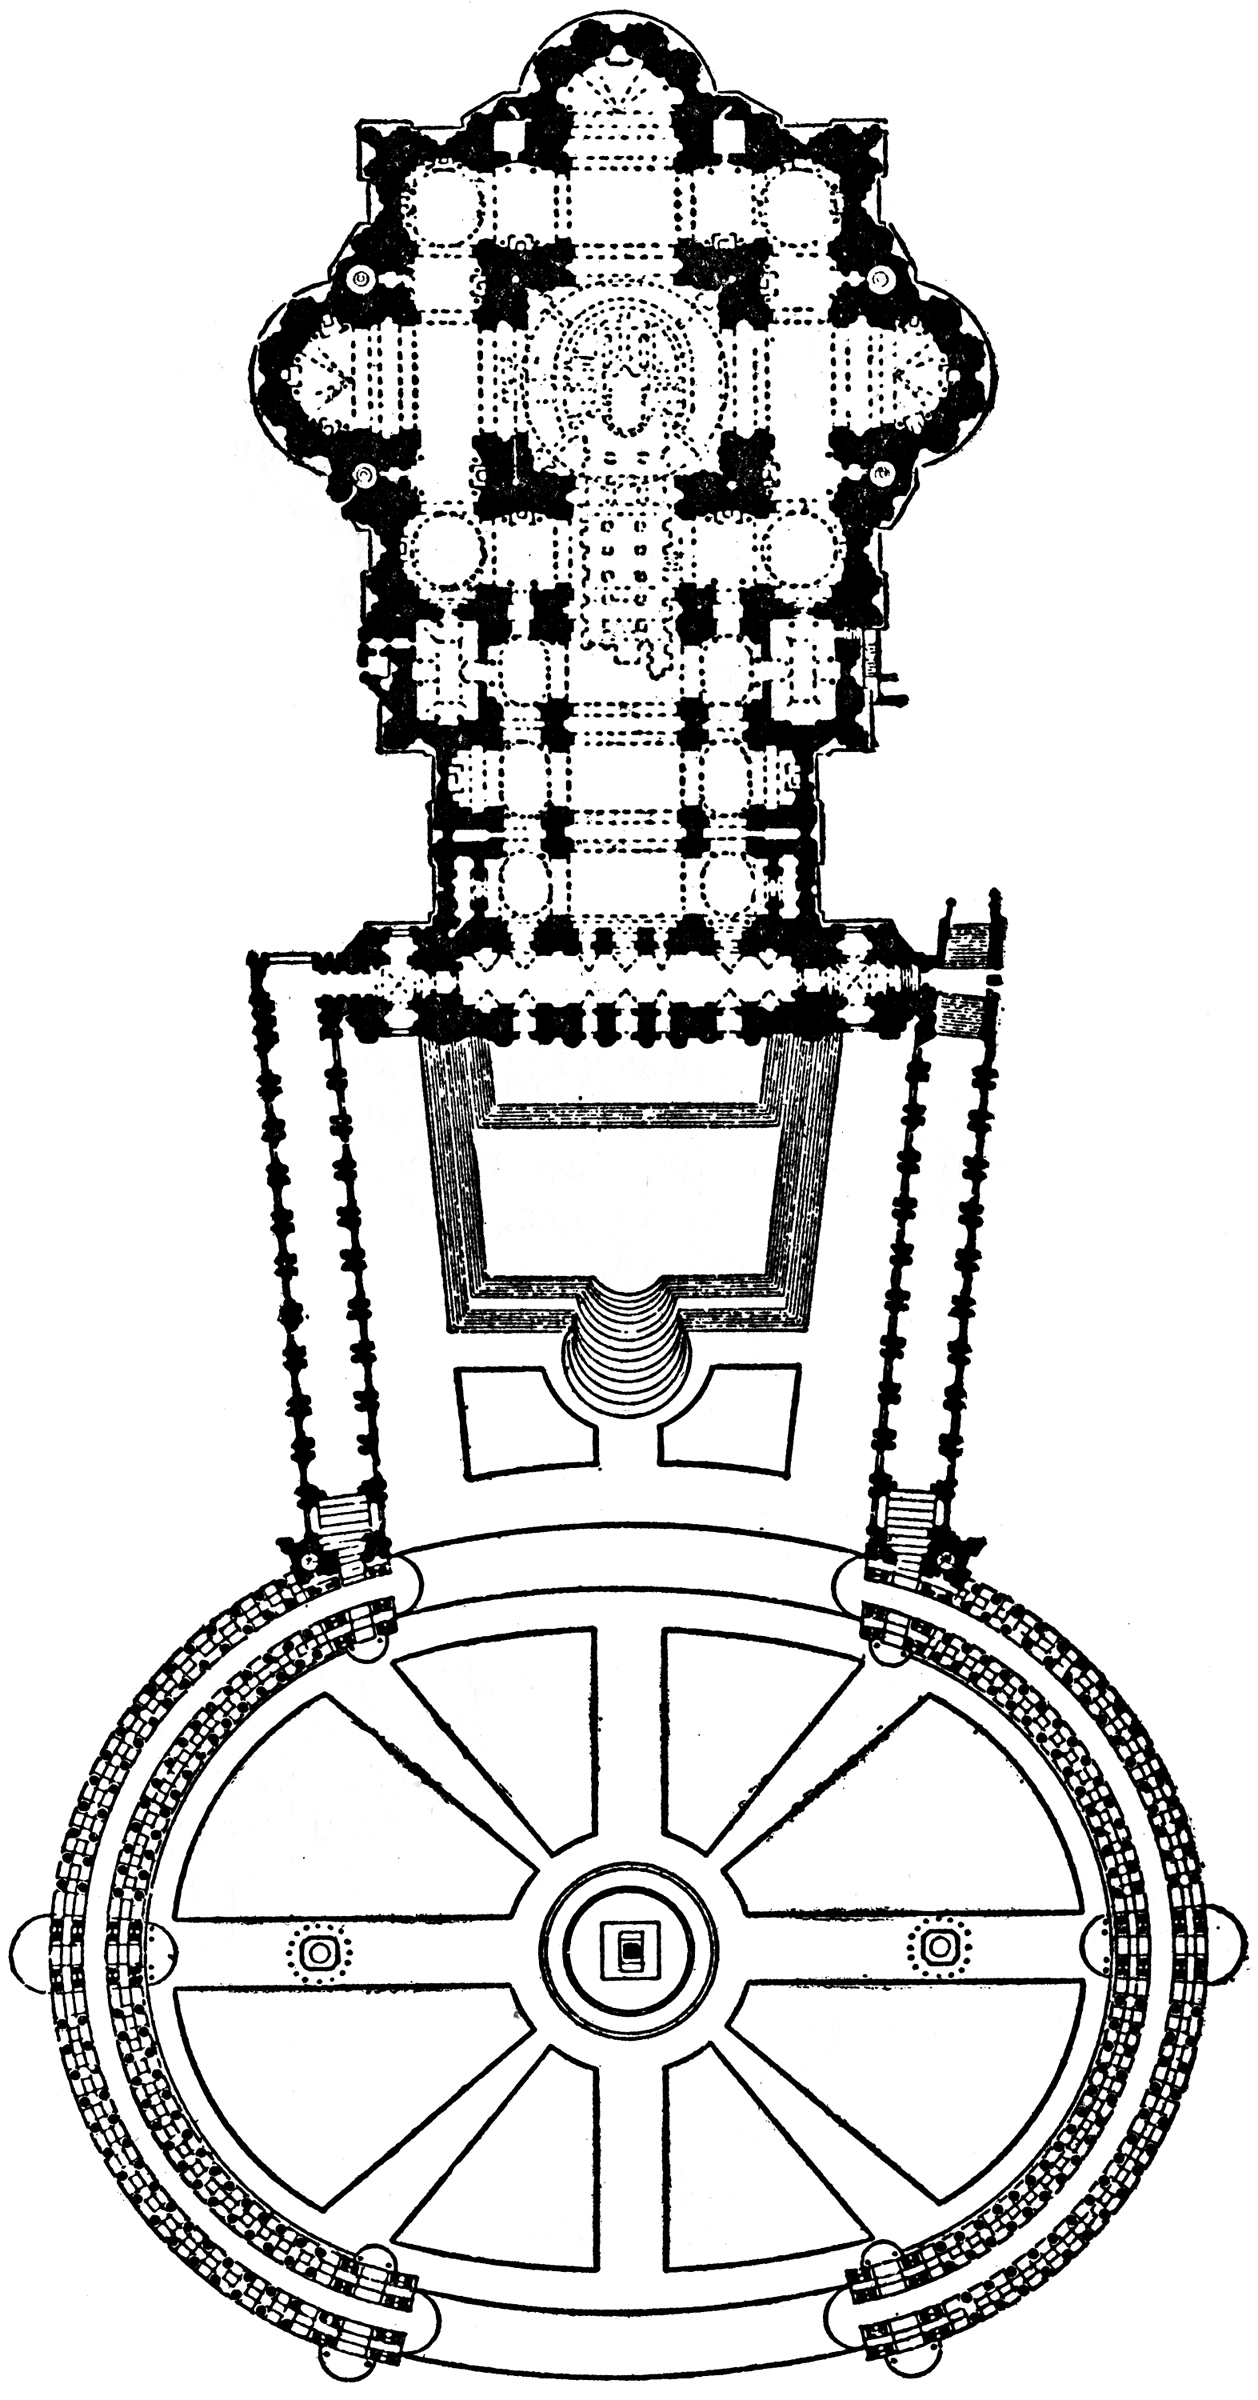 Plan of St Peter's at Rome, 1546–1564 | ClipArt ETC